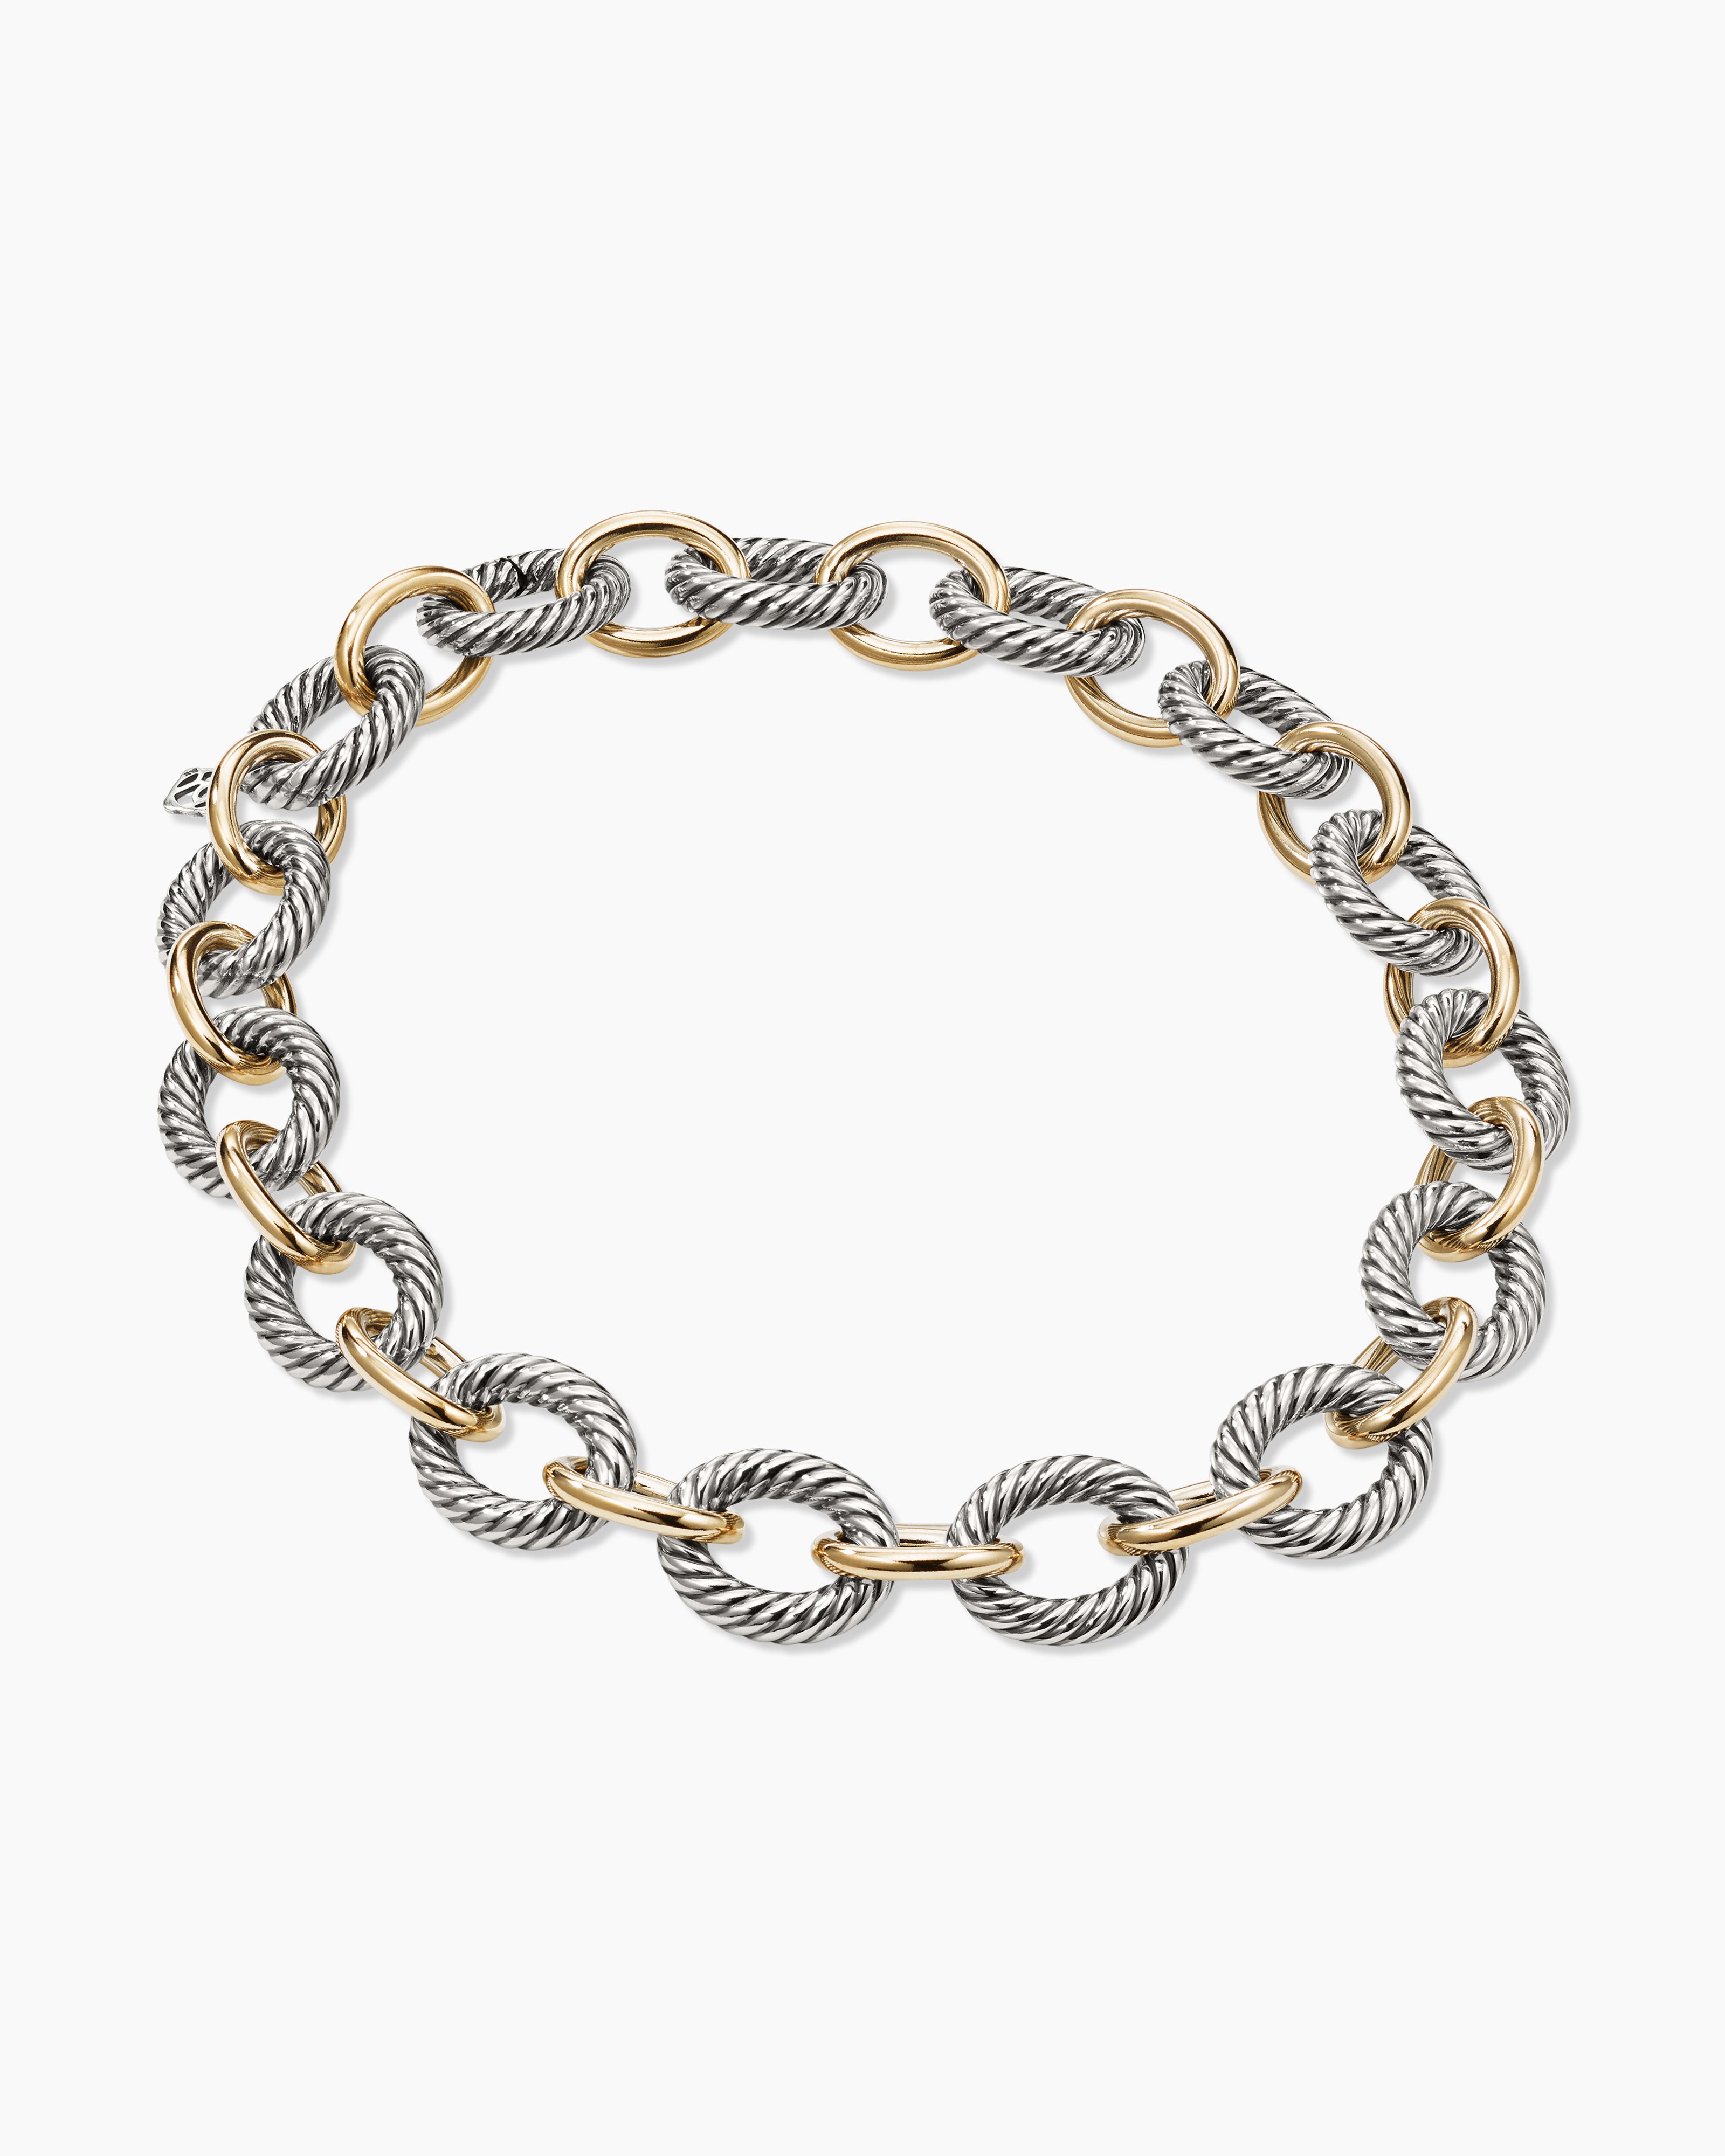 David Yurman DY Mercer Link Bracelet in Sterling Silver and 18k Yellow  Gold, 8 inches | Lee Michaels Fine Jewelry store